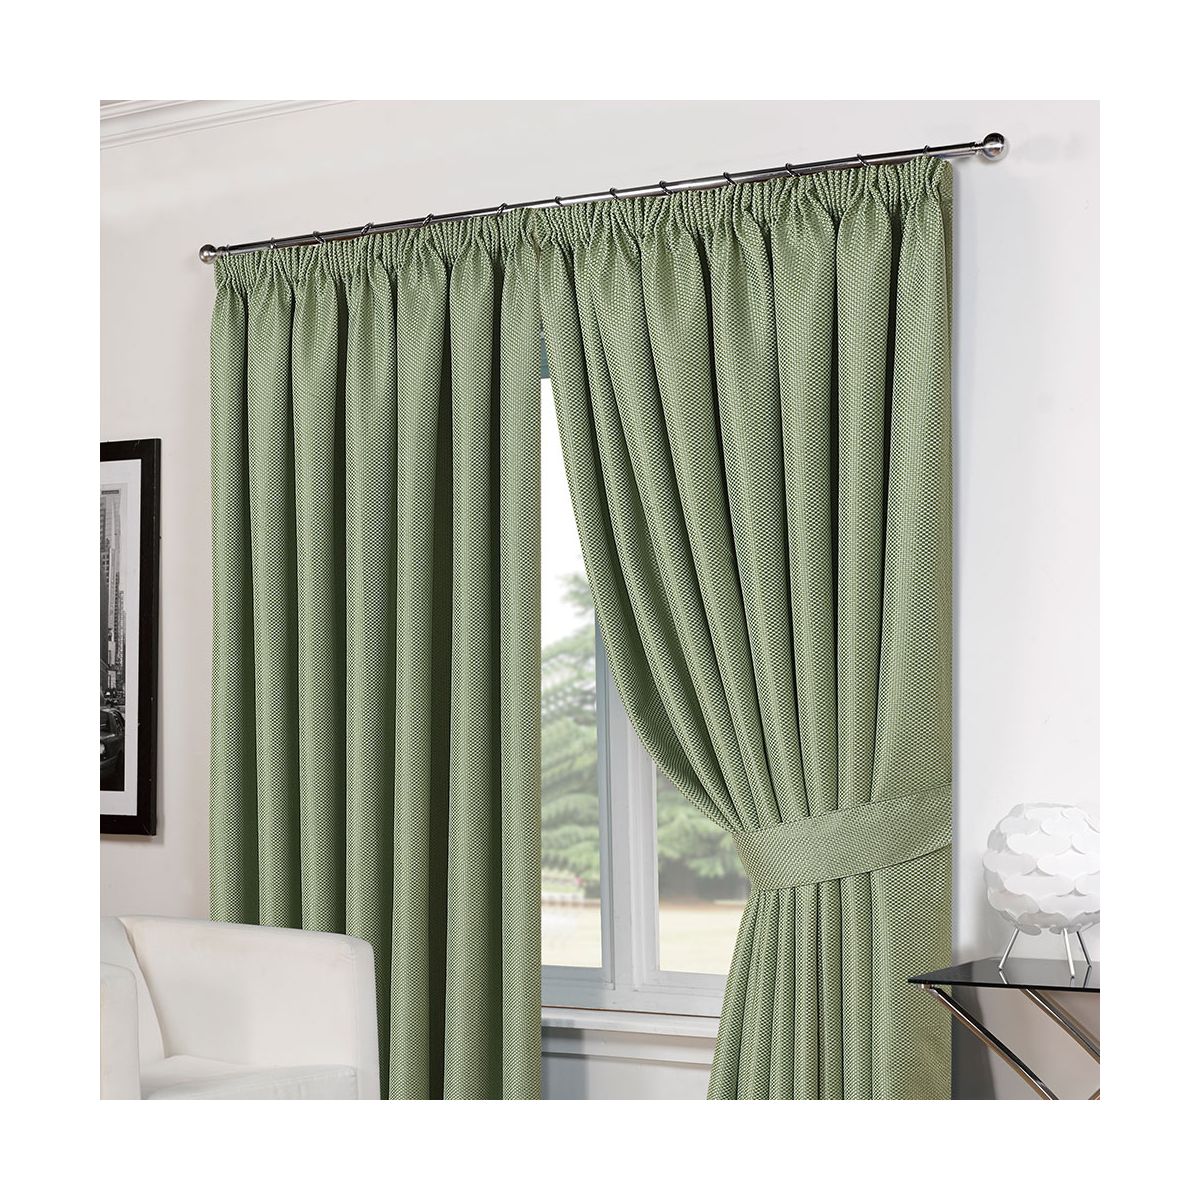 Luxury Basket Weave Lined  Tape Top Curtains with Tiebacks - Soft Green 46x54